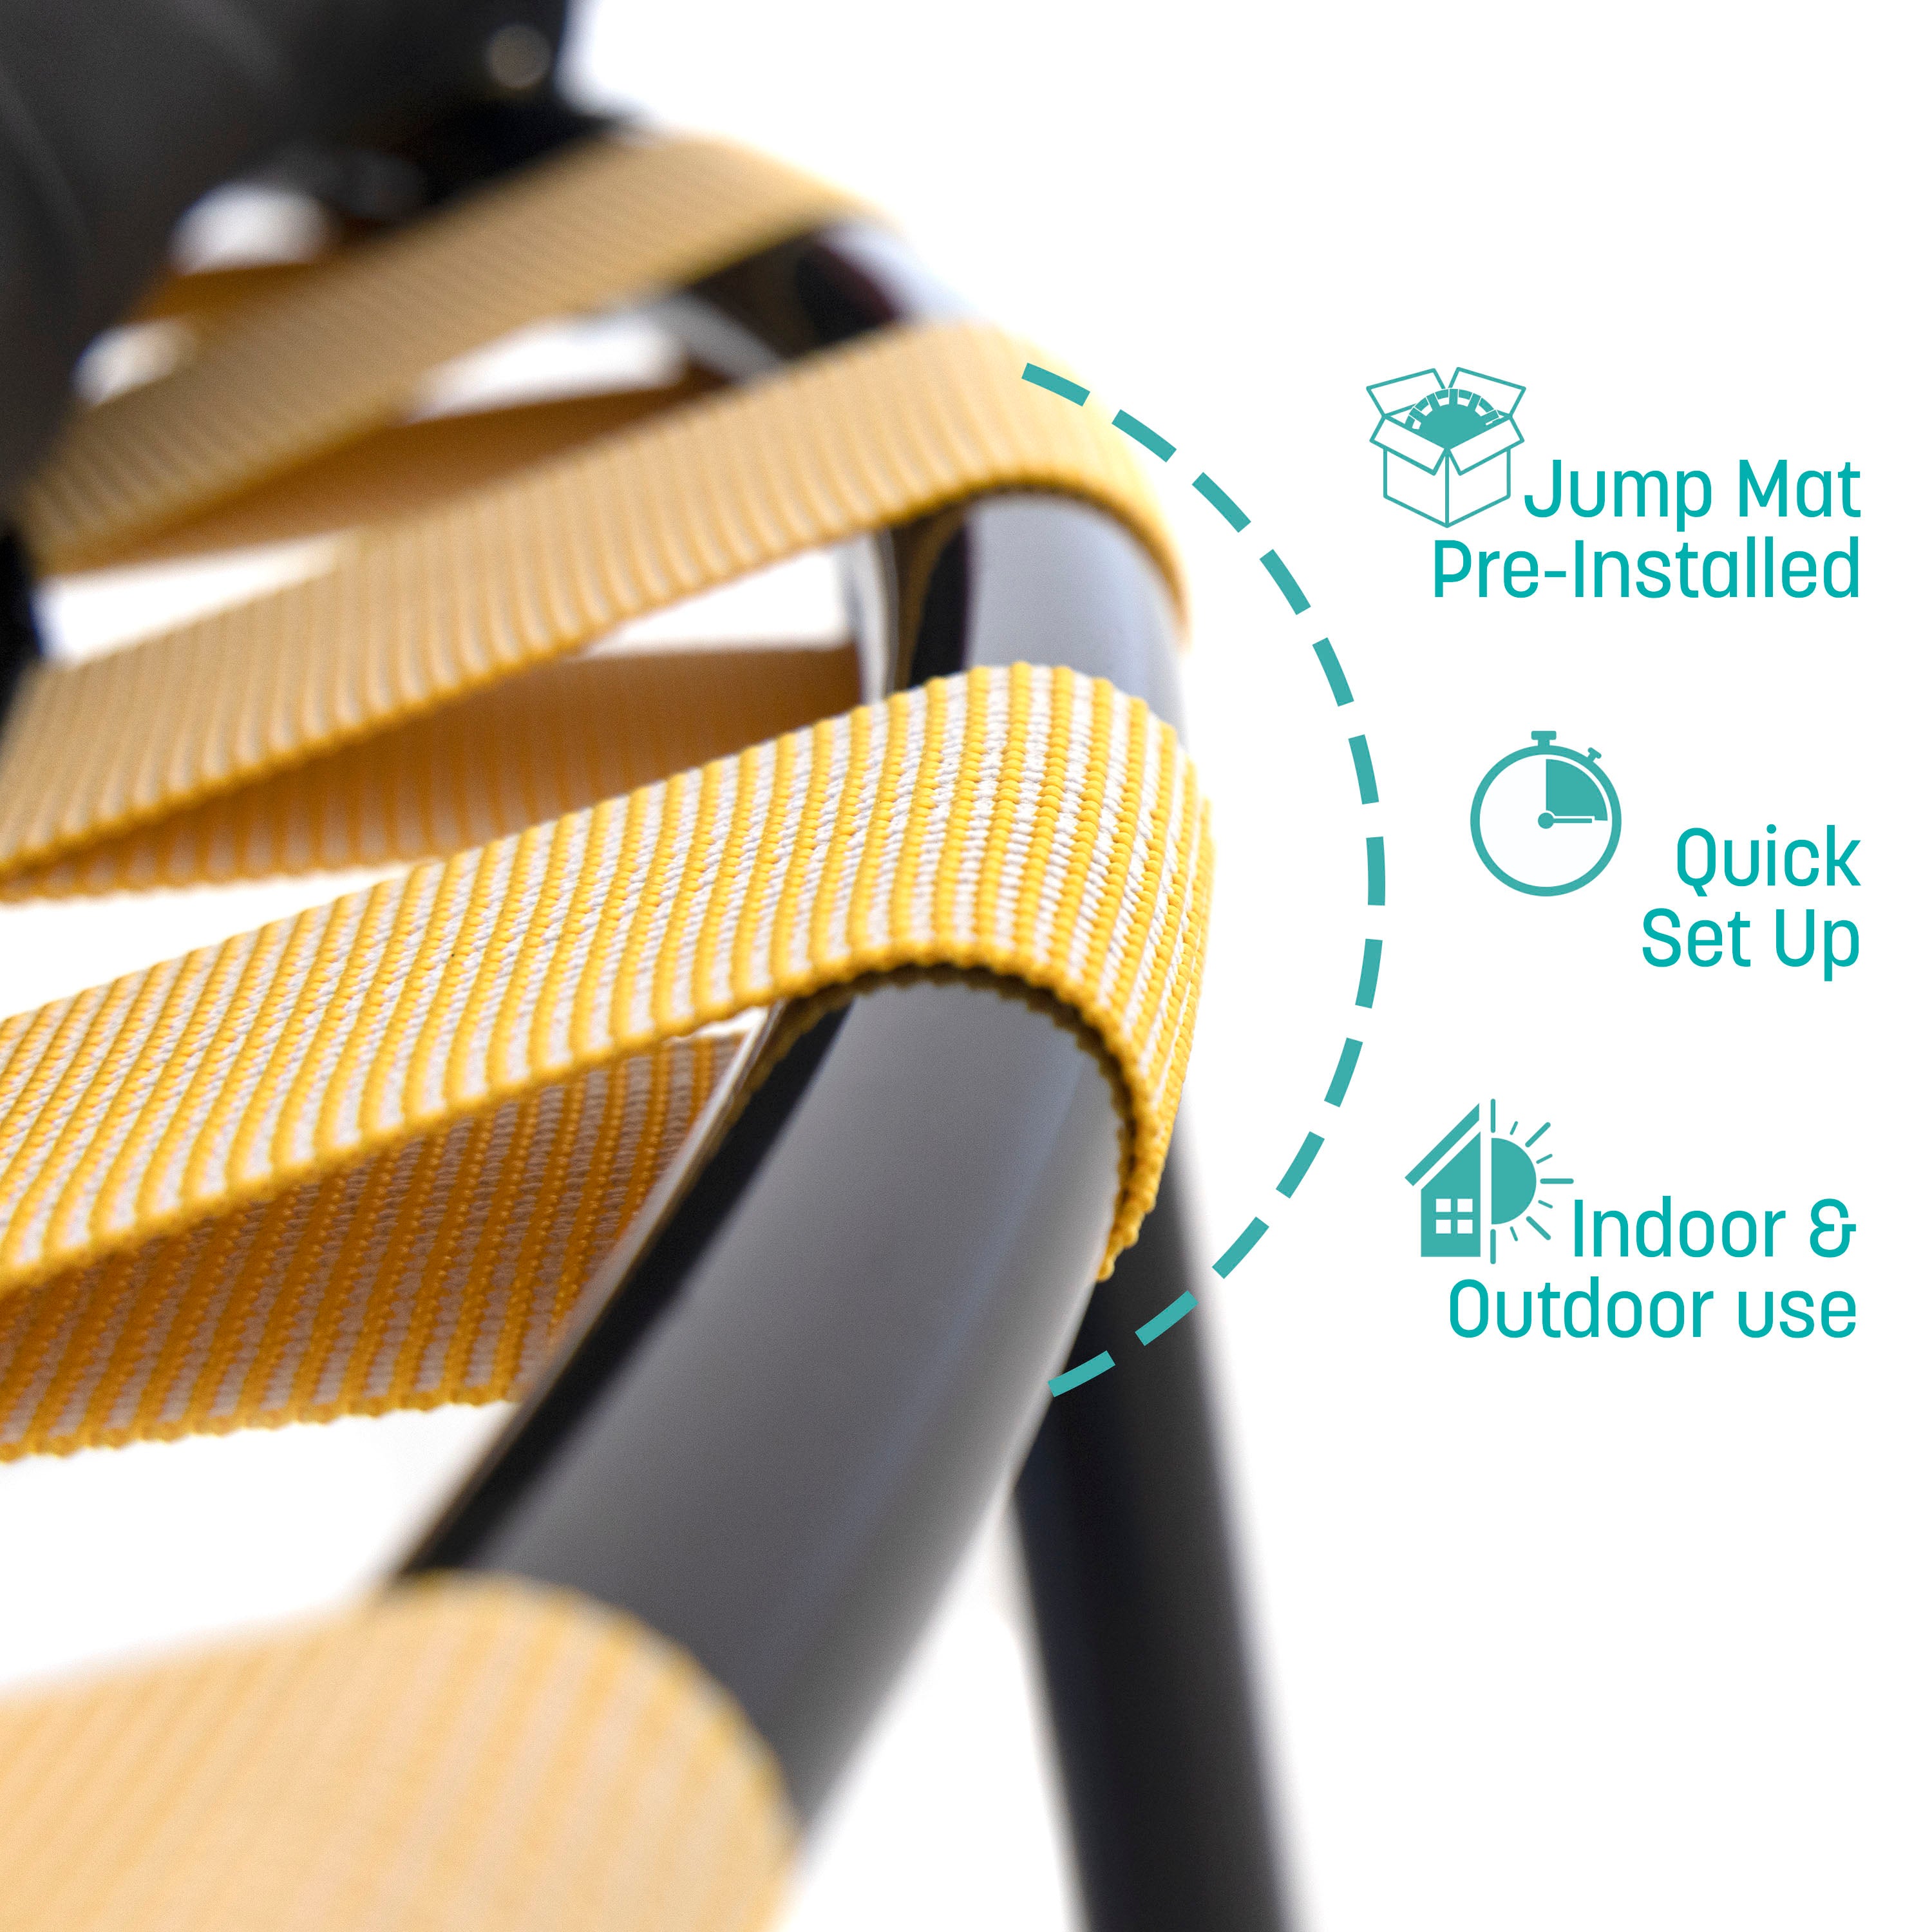 Yellow stretch bands on black frame. Teal callout features state, “Jump Mat Pre-Installed, Quick Set Up, Indoor & Outdoor Use”.